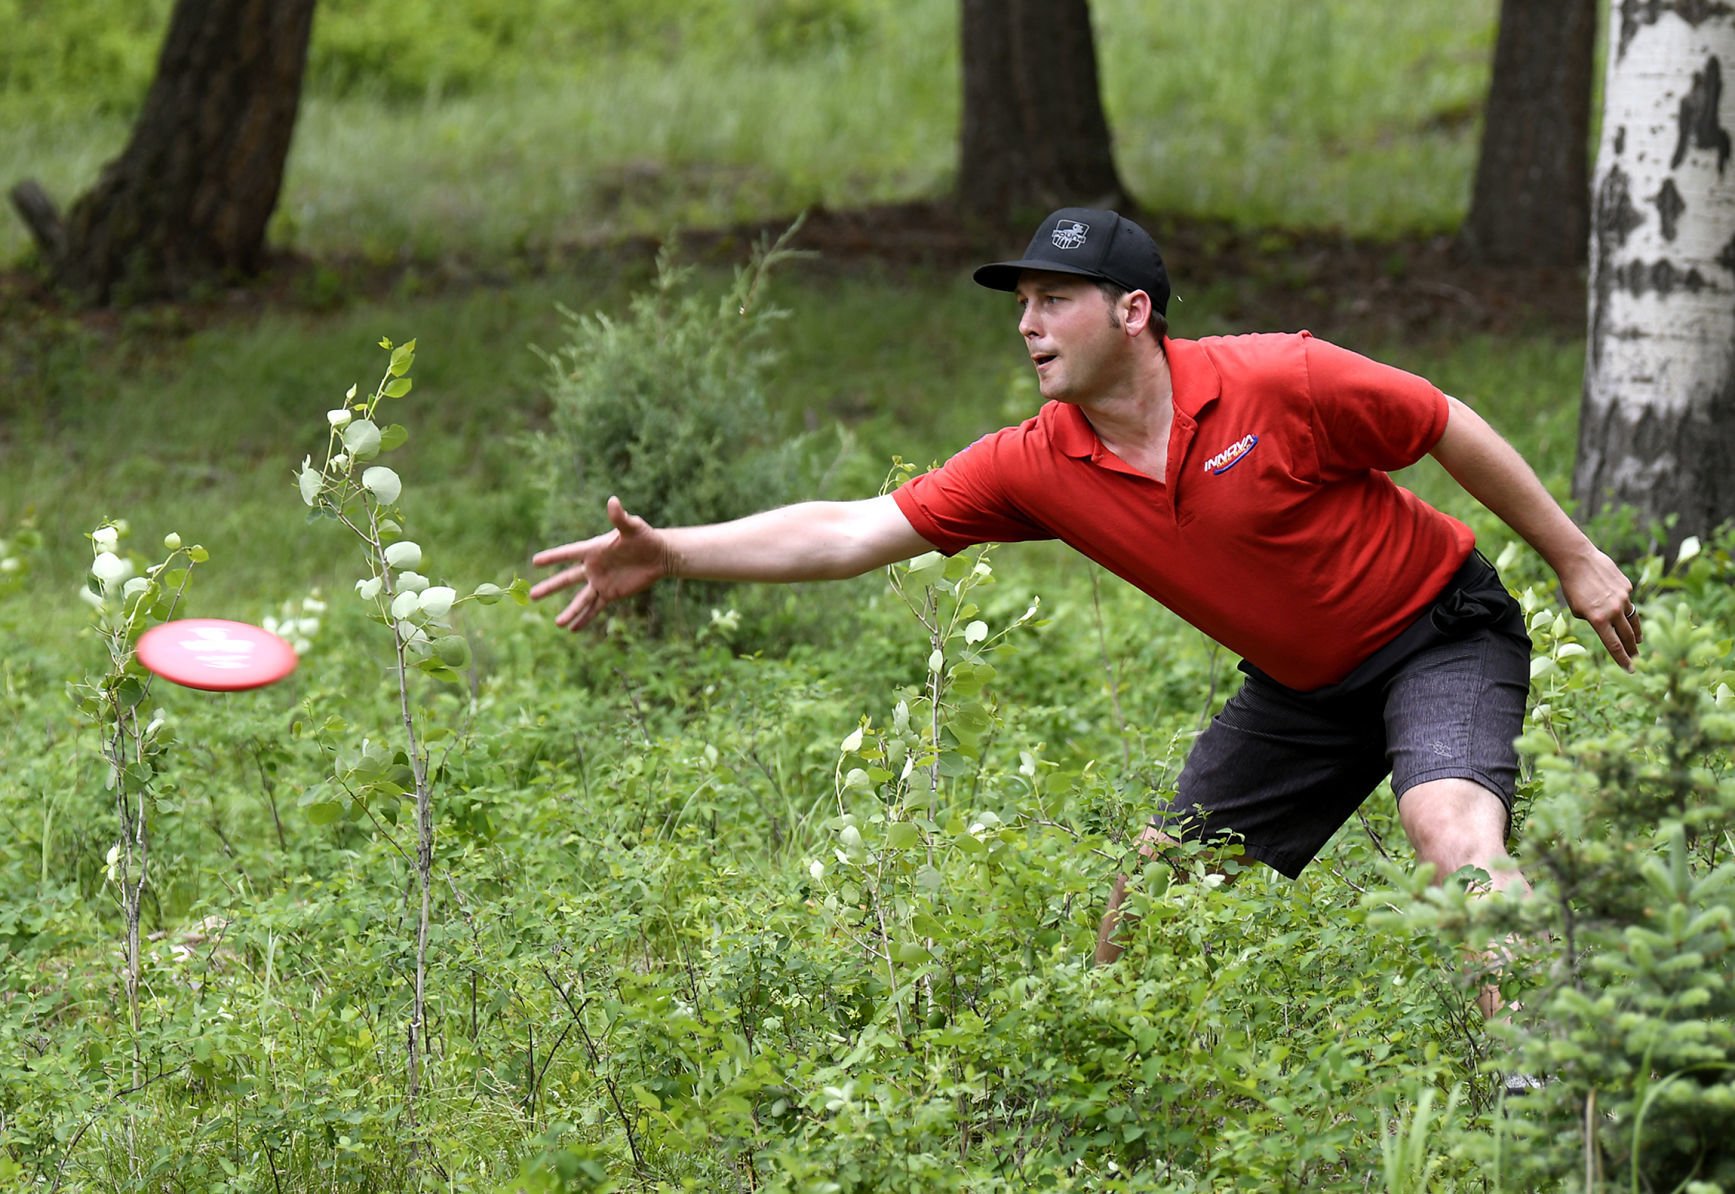 13th annual Zoo Town Open to feature worlds best disc golfers picture picture